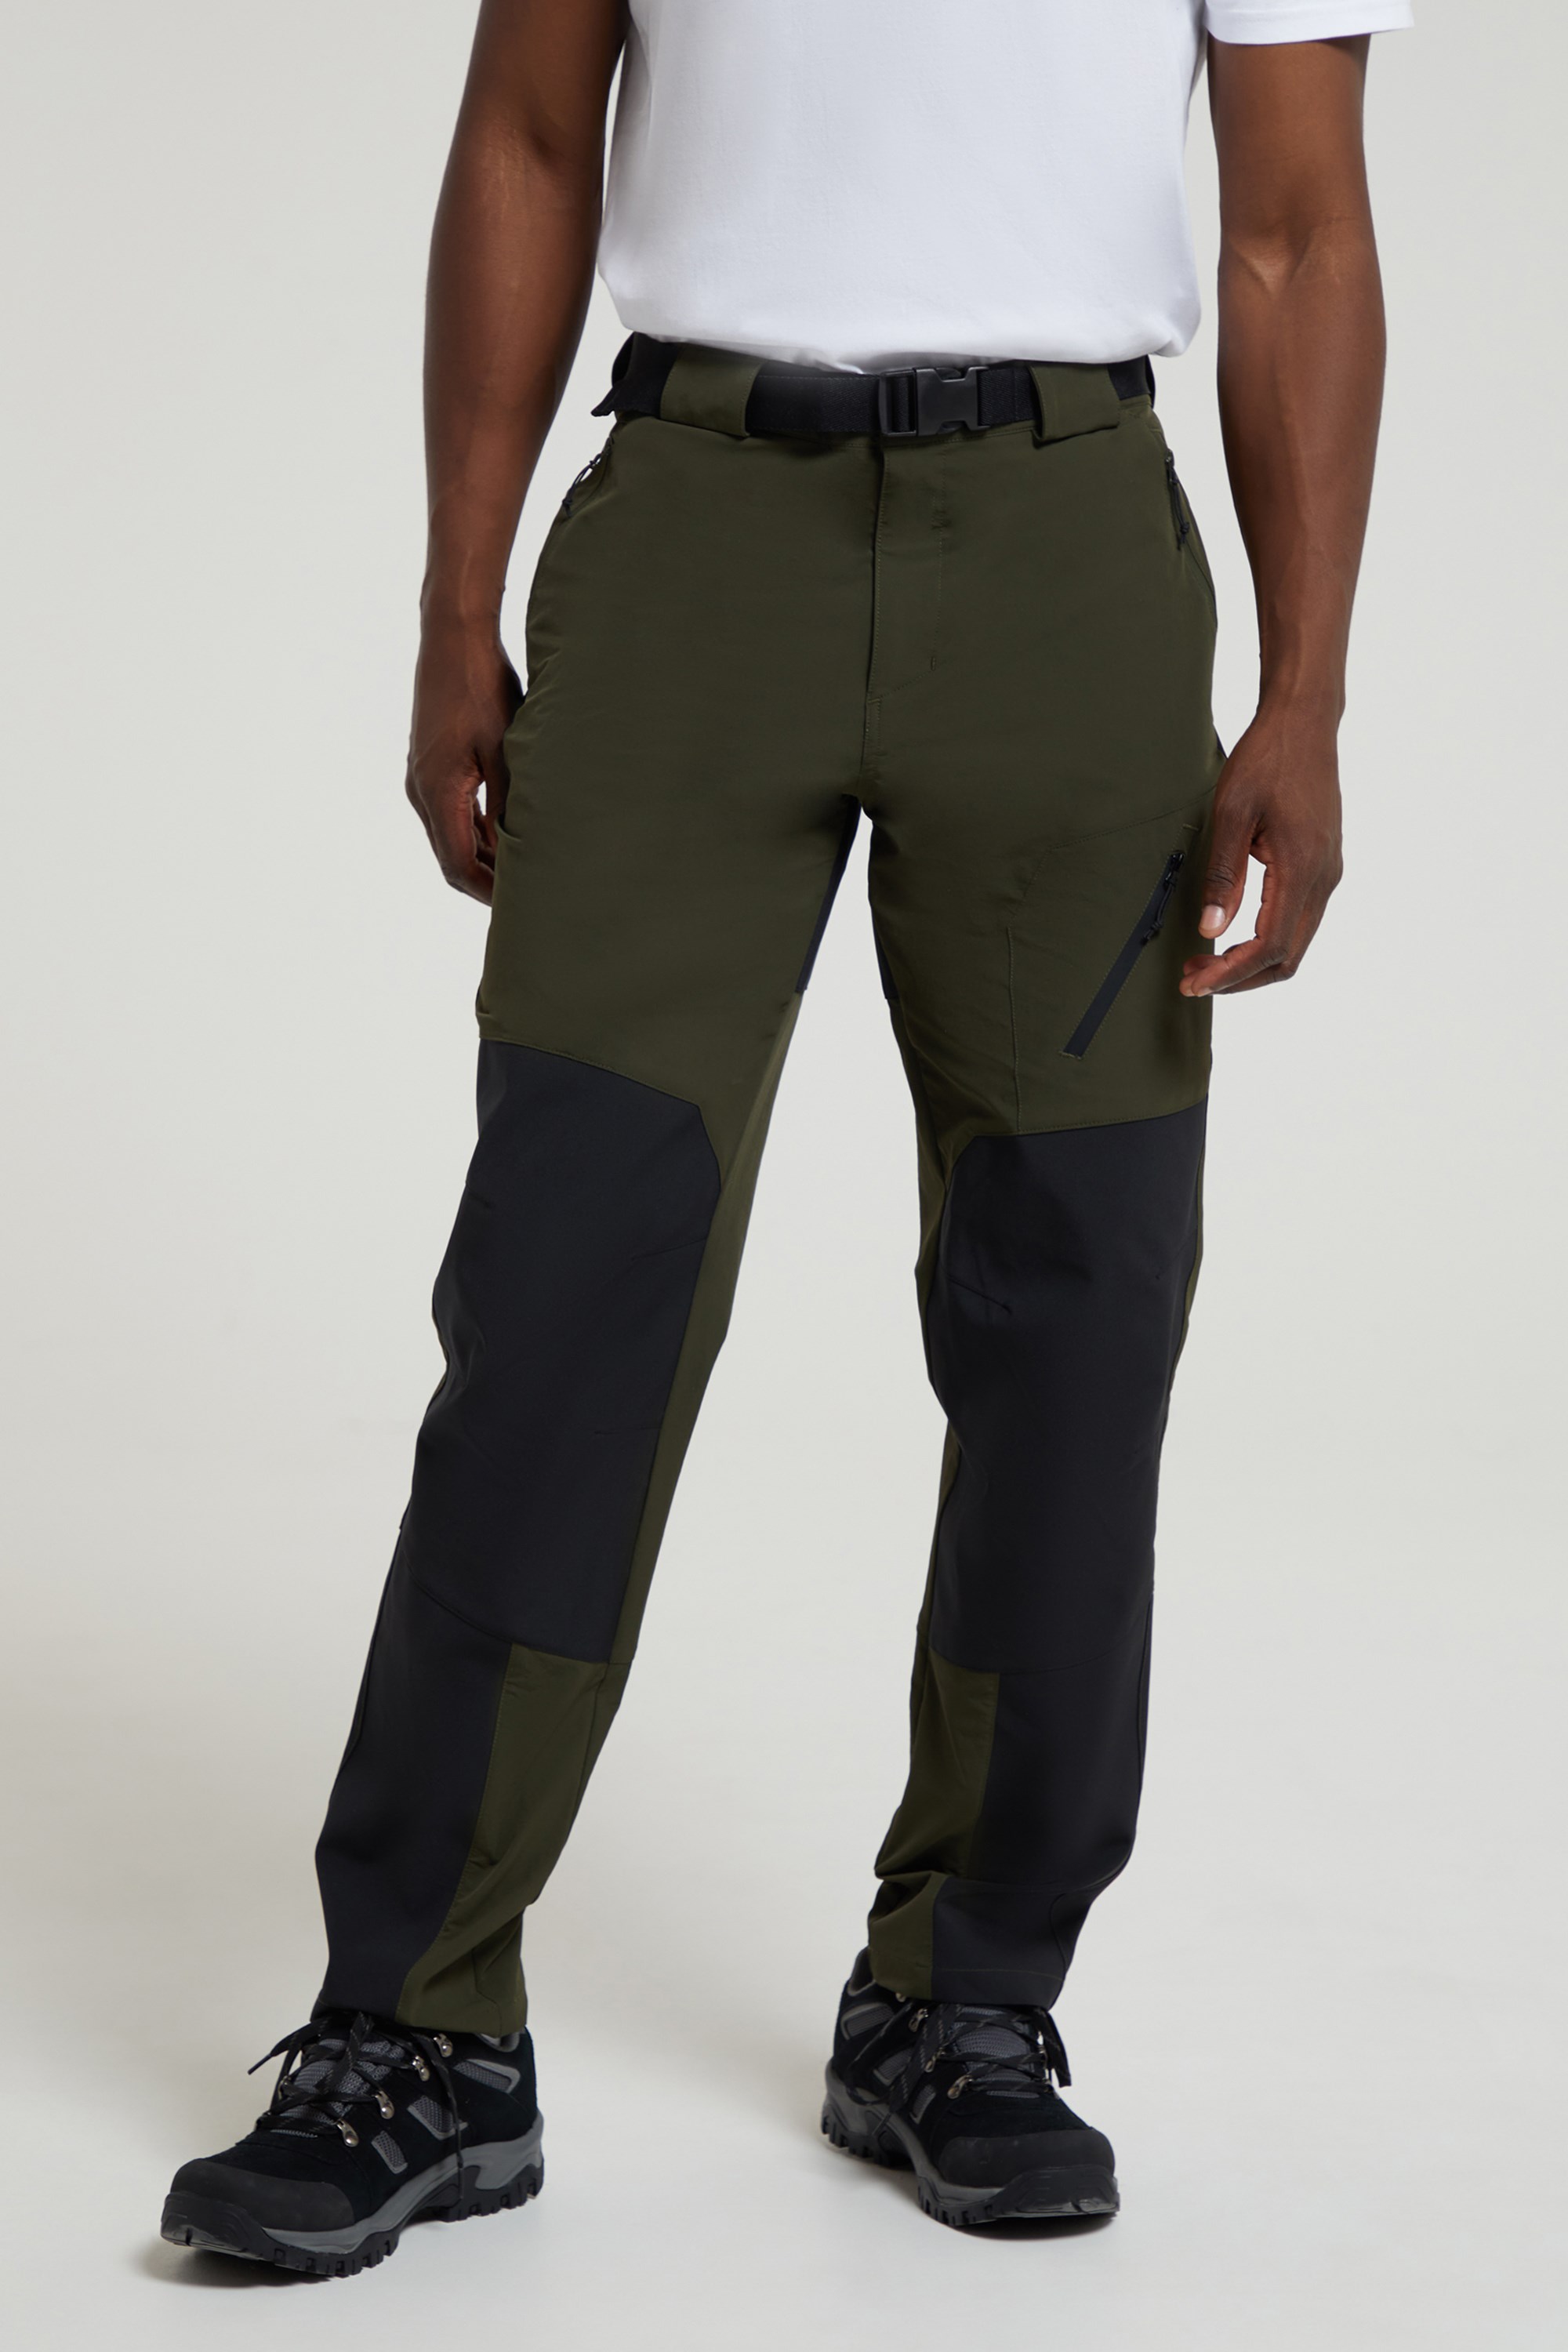 LHHMZ Outdoor Hiking Trousers Mens Convertible Quick Dry Walking Pants  Breathable Zip Off Climbing Trousers : Amazon.com.au: Clothing, Shoes &  Accessories